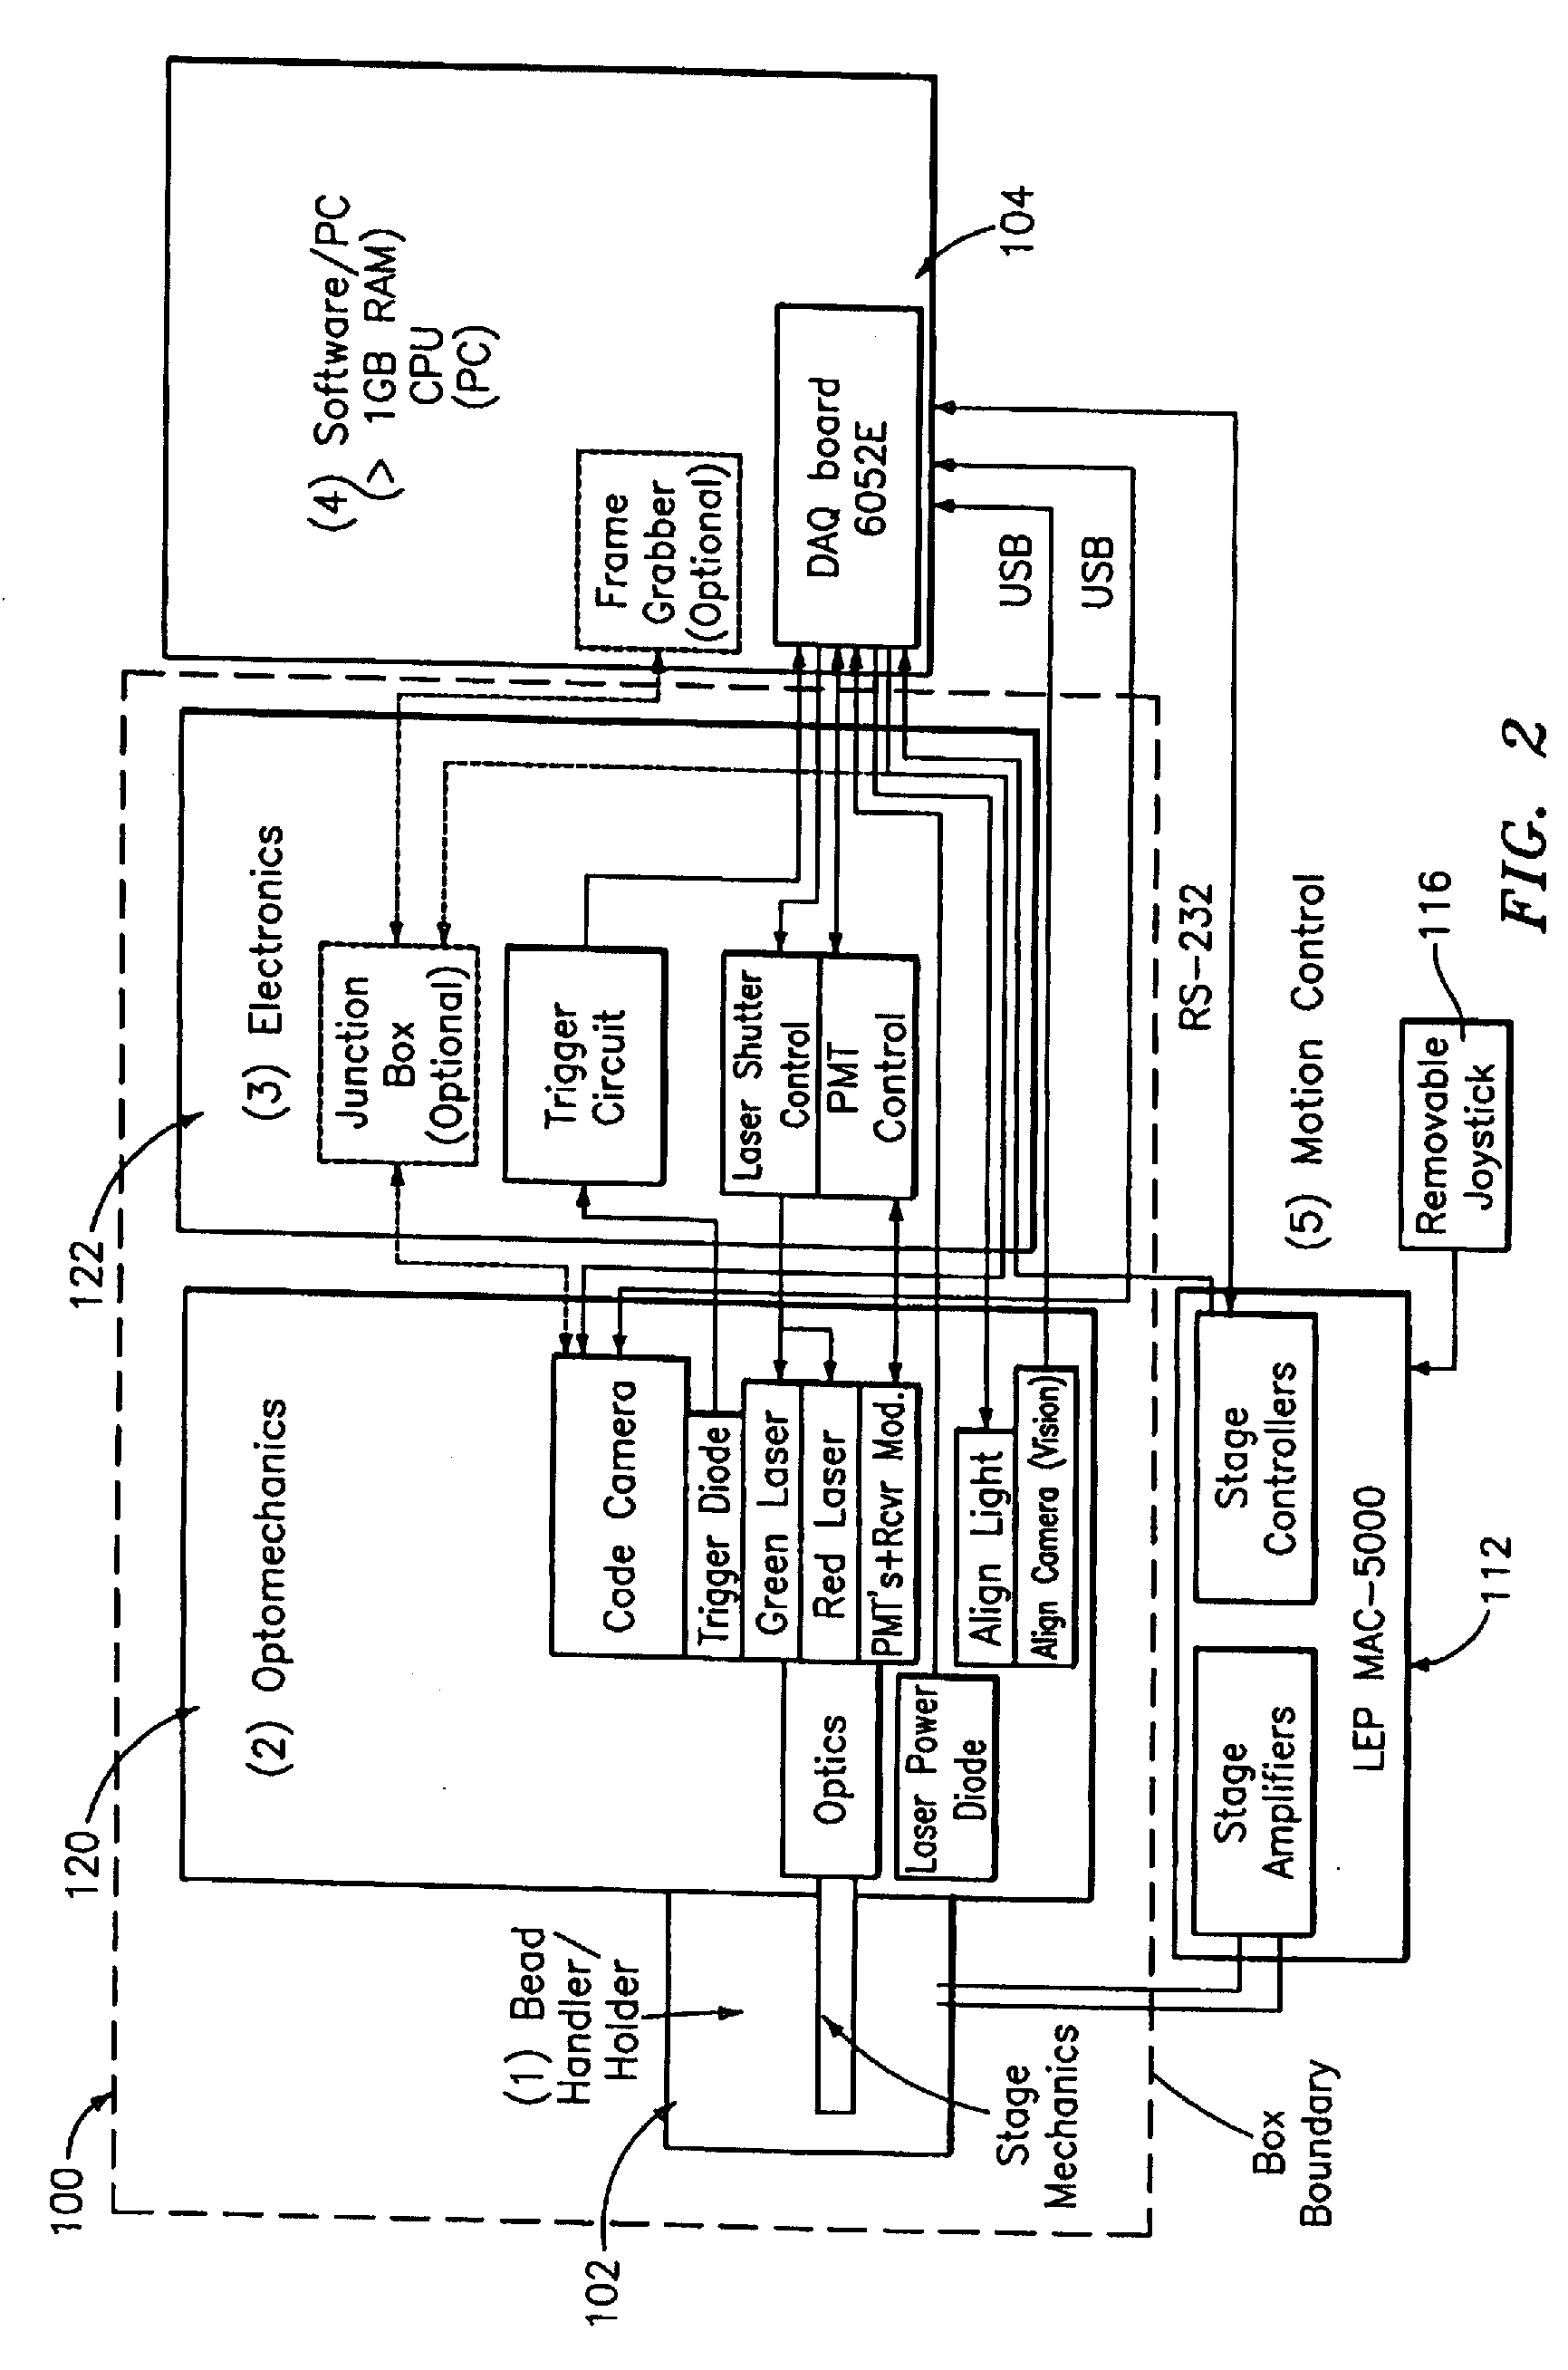 Optical reader system for substrates having an optically readable code